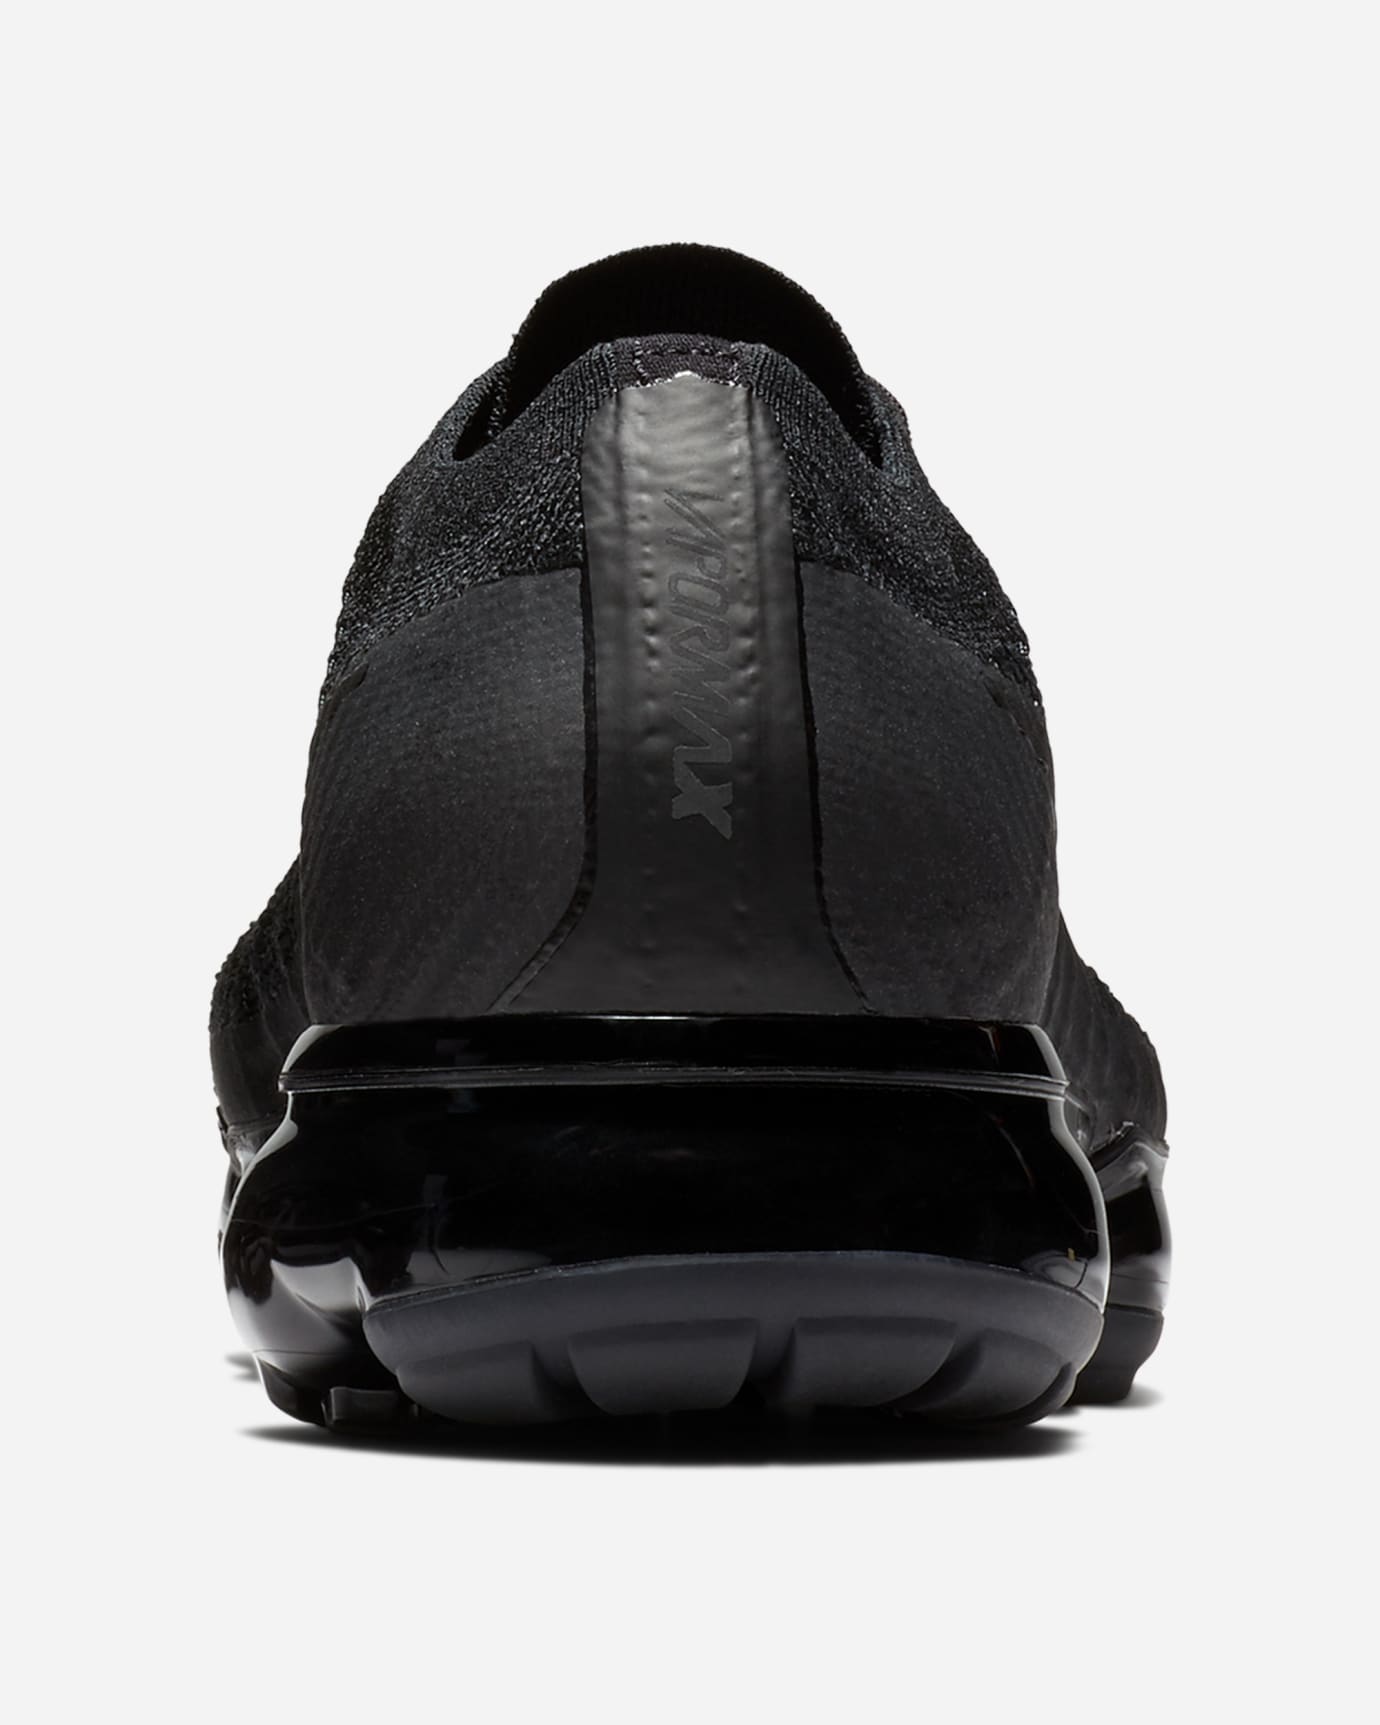 Yet Another 'Triple Black' VaporMax | Sole Collector